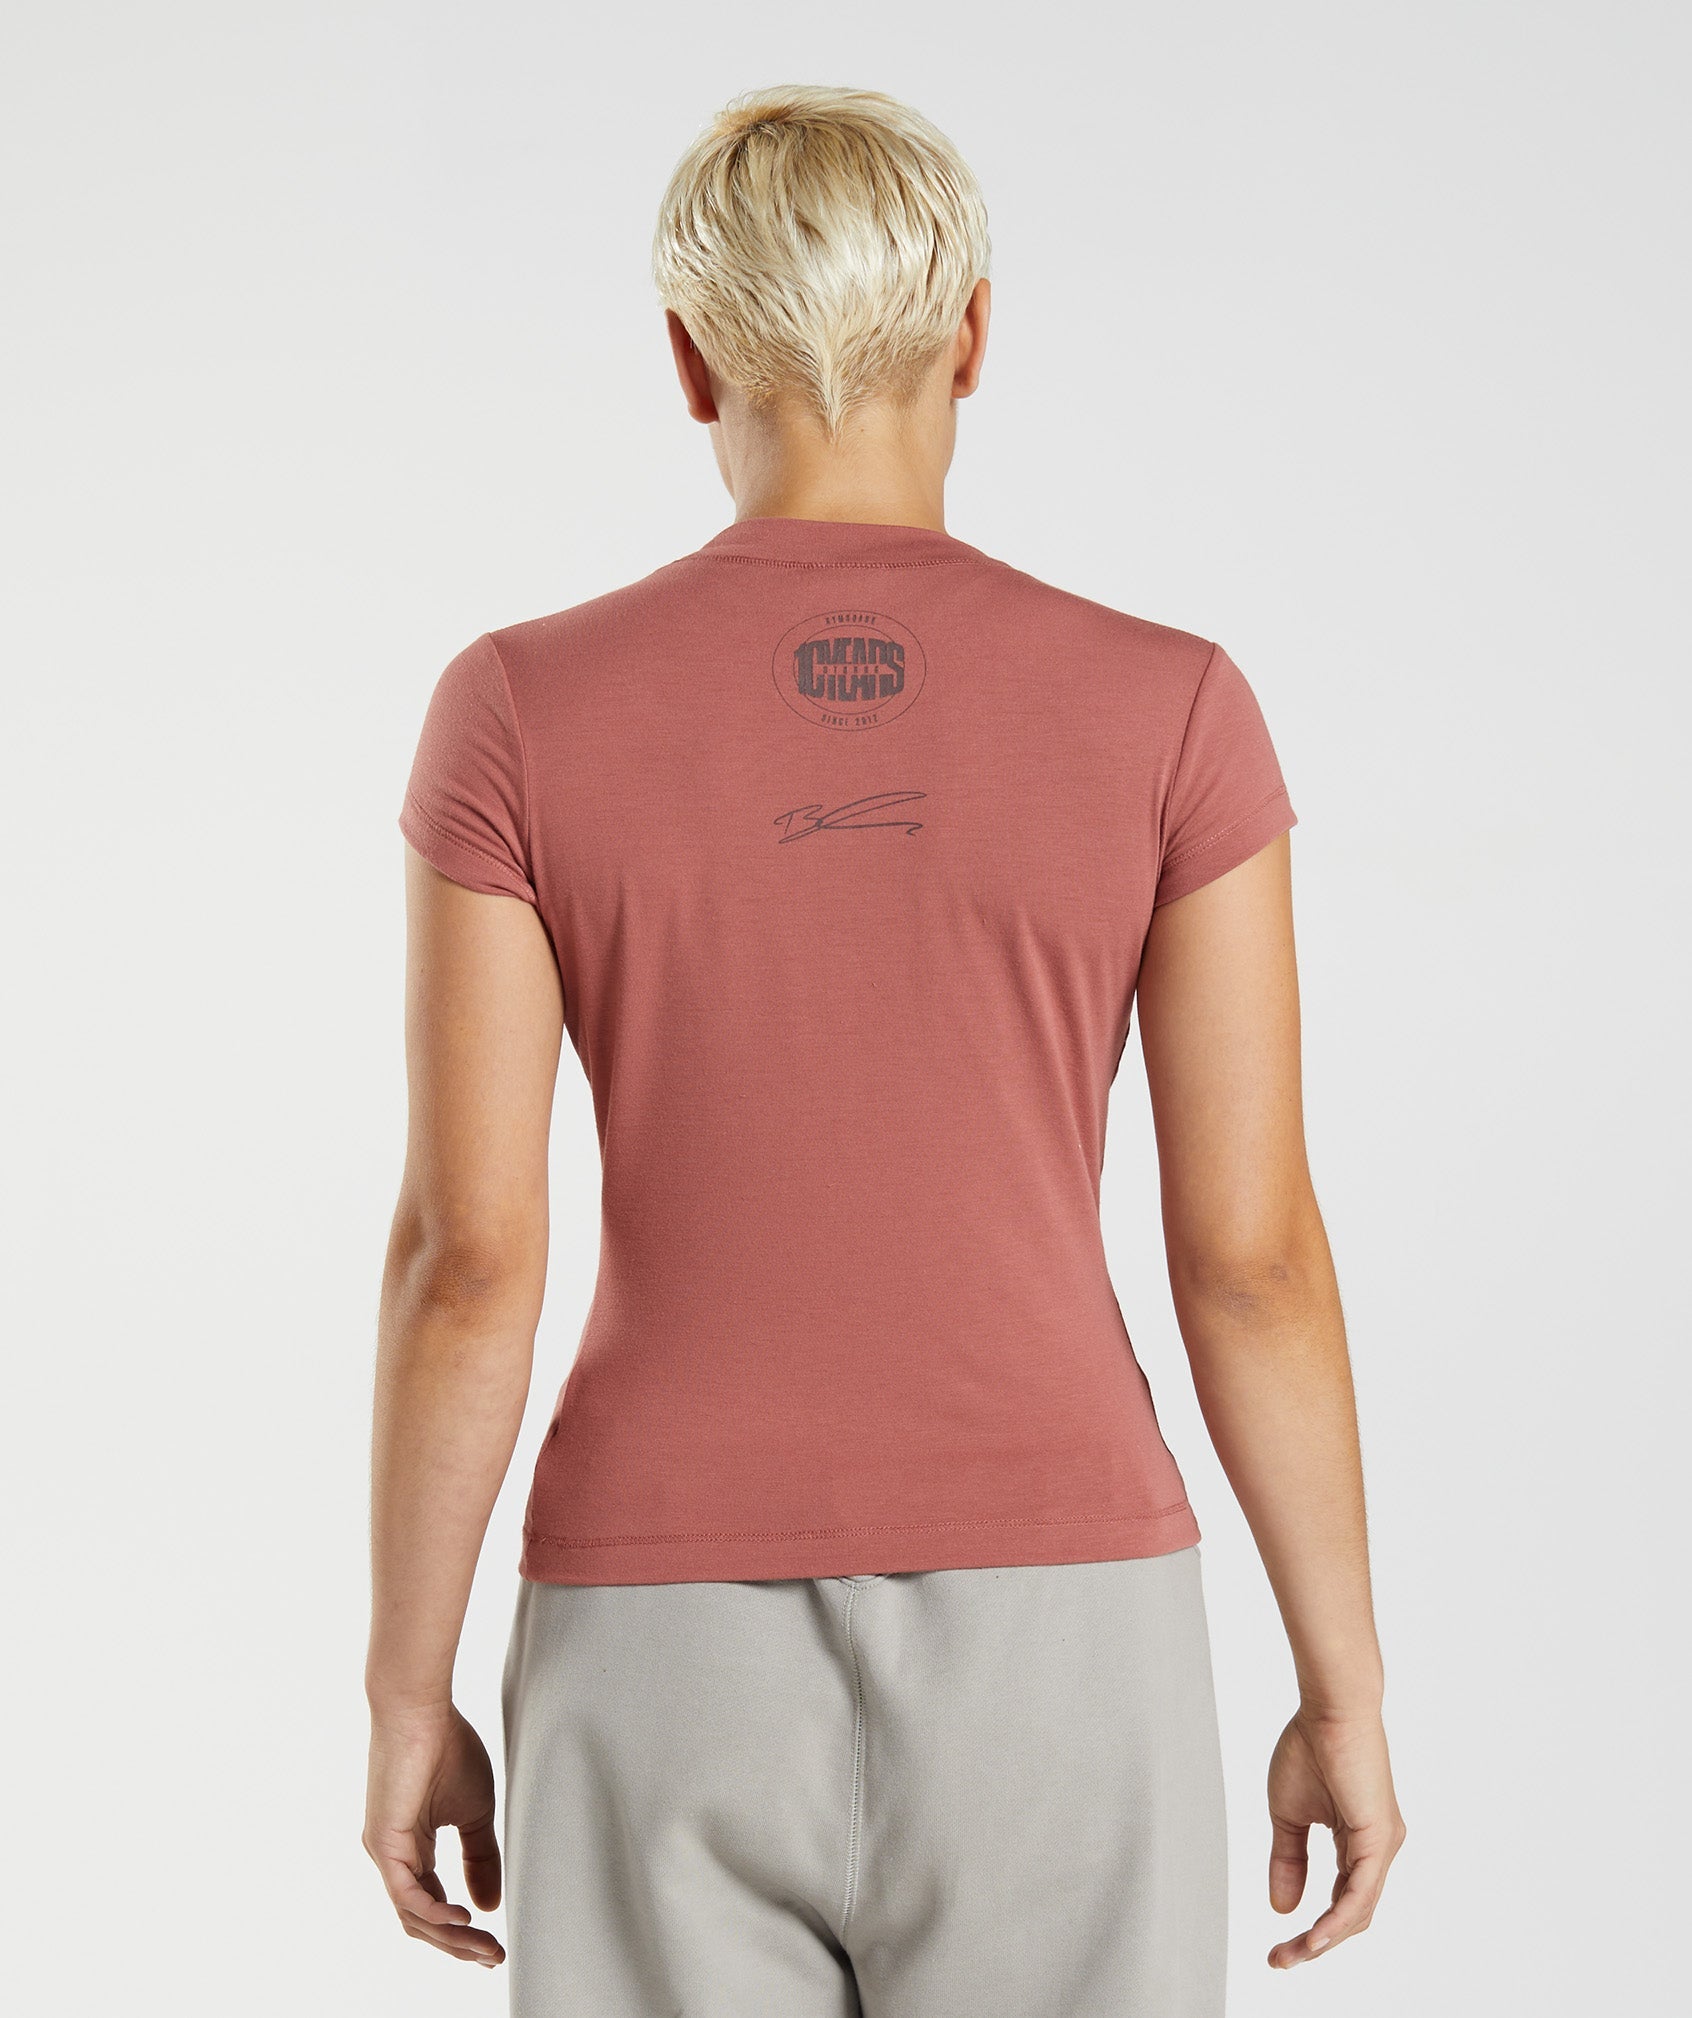 GS10 Year Body Fit T-Shirt in Rose Brown - view 2